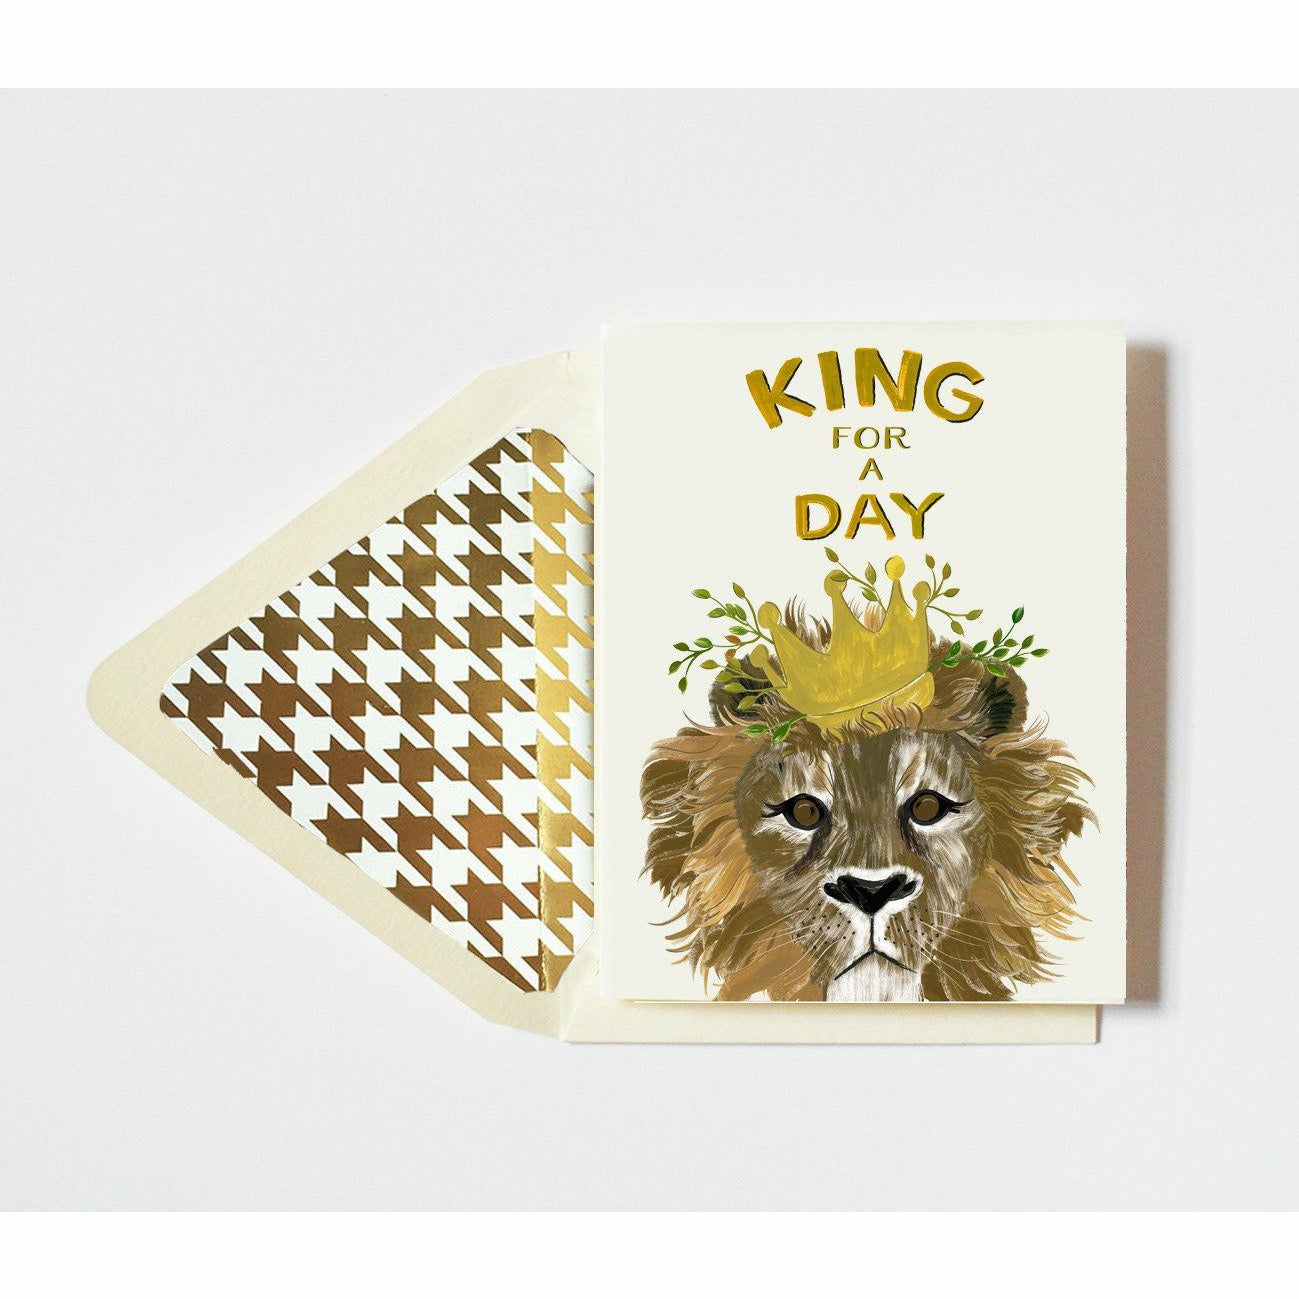 King for a Day Card - The First Snow